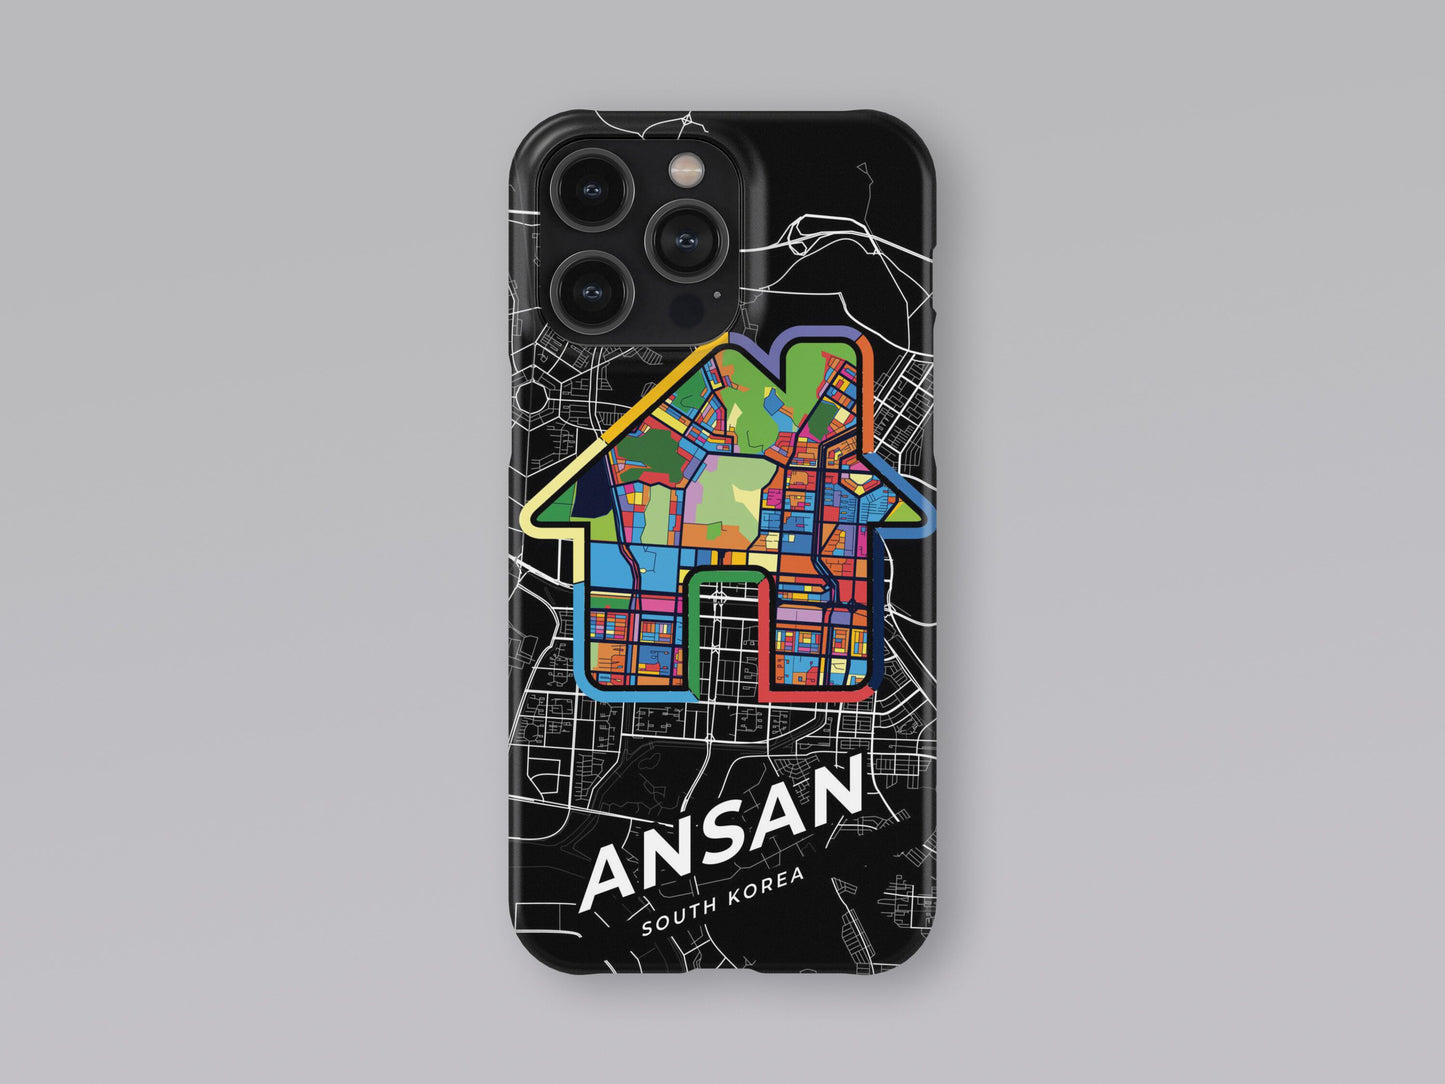 Ansan South Korea slim phone case with colorful icon. Birthday, wedding or housewarming gift. Couple match cases. 3